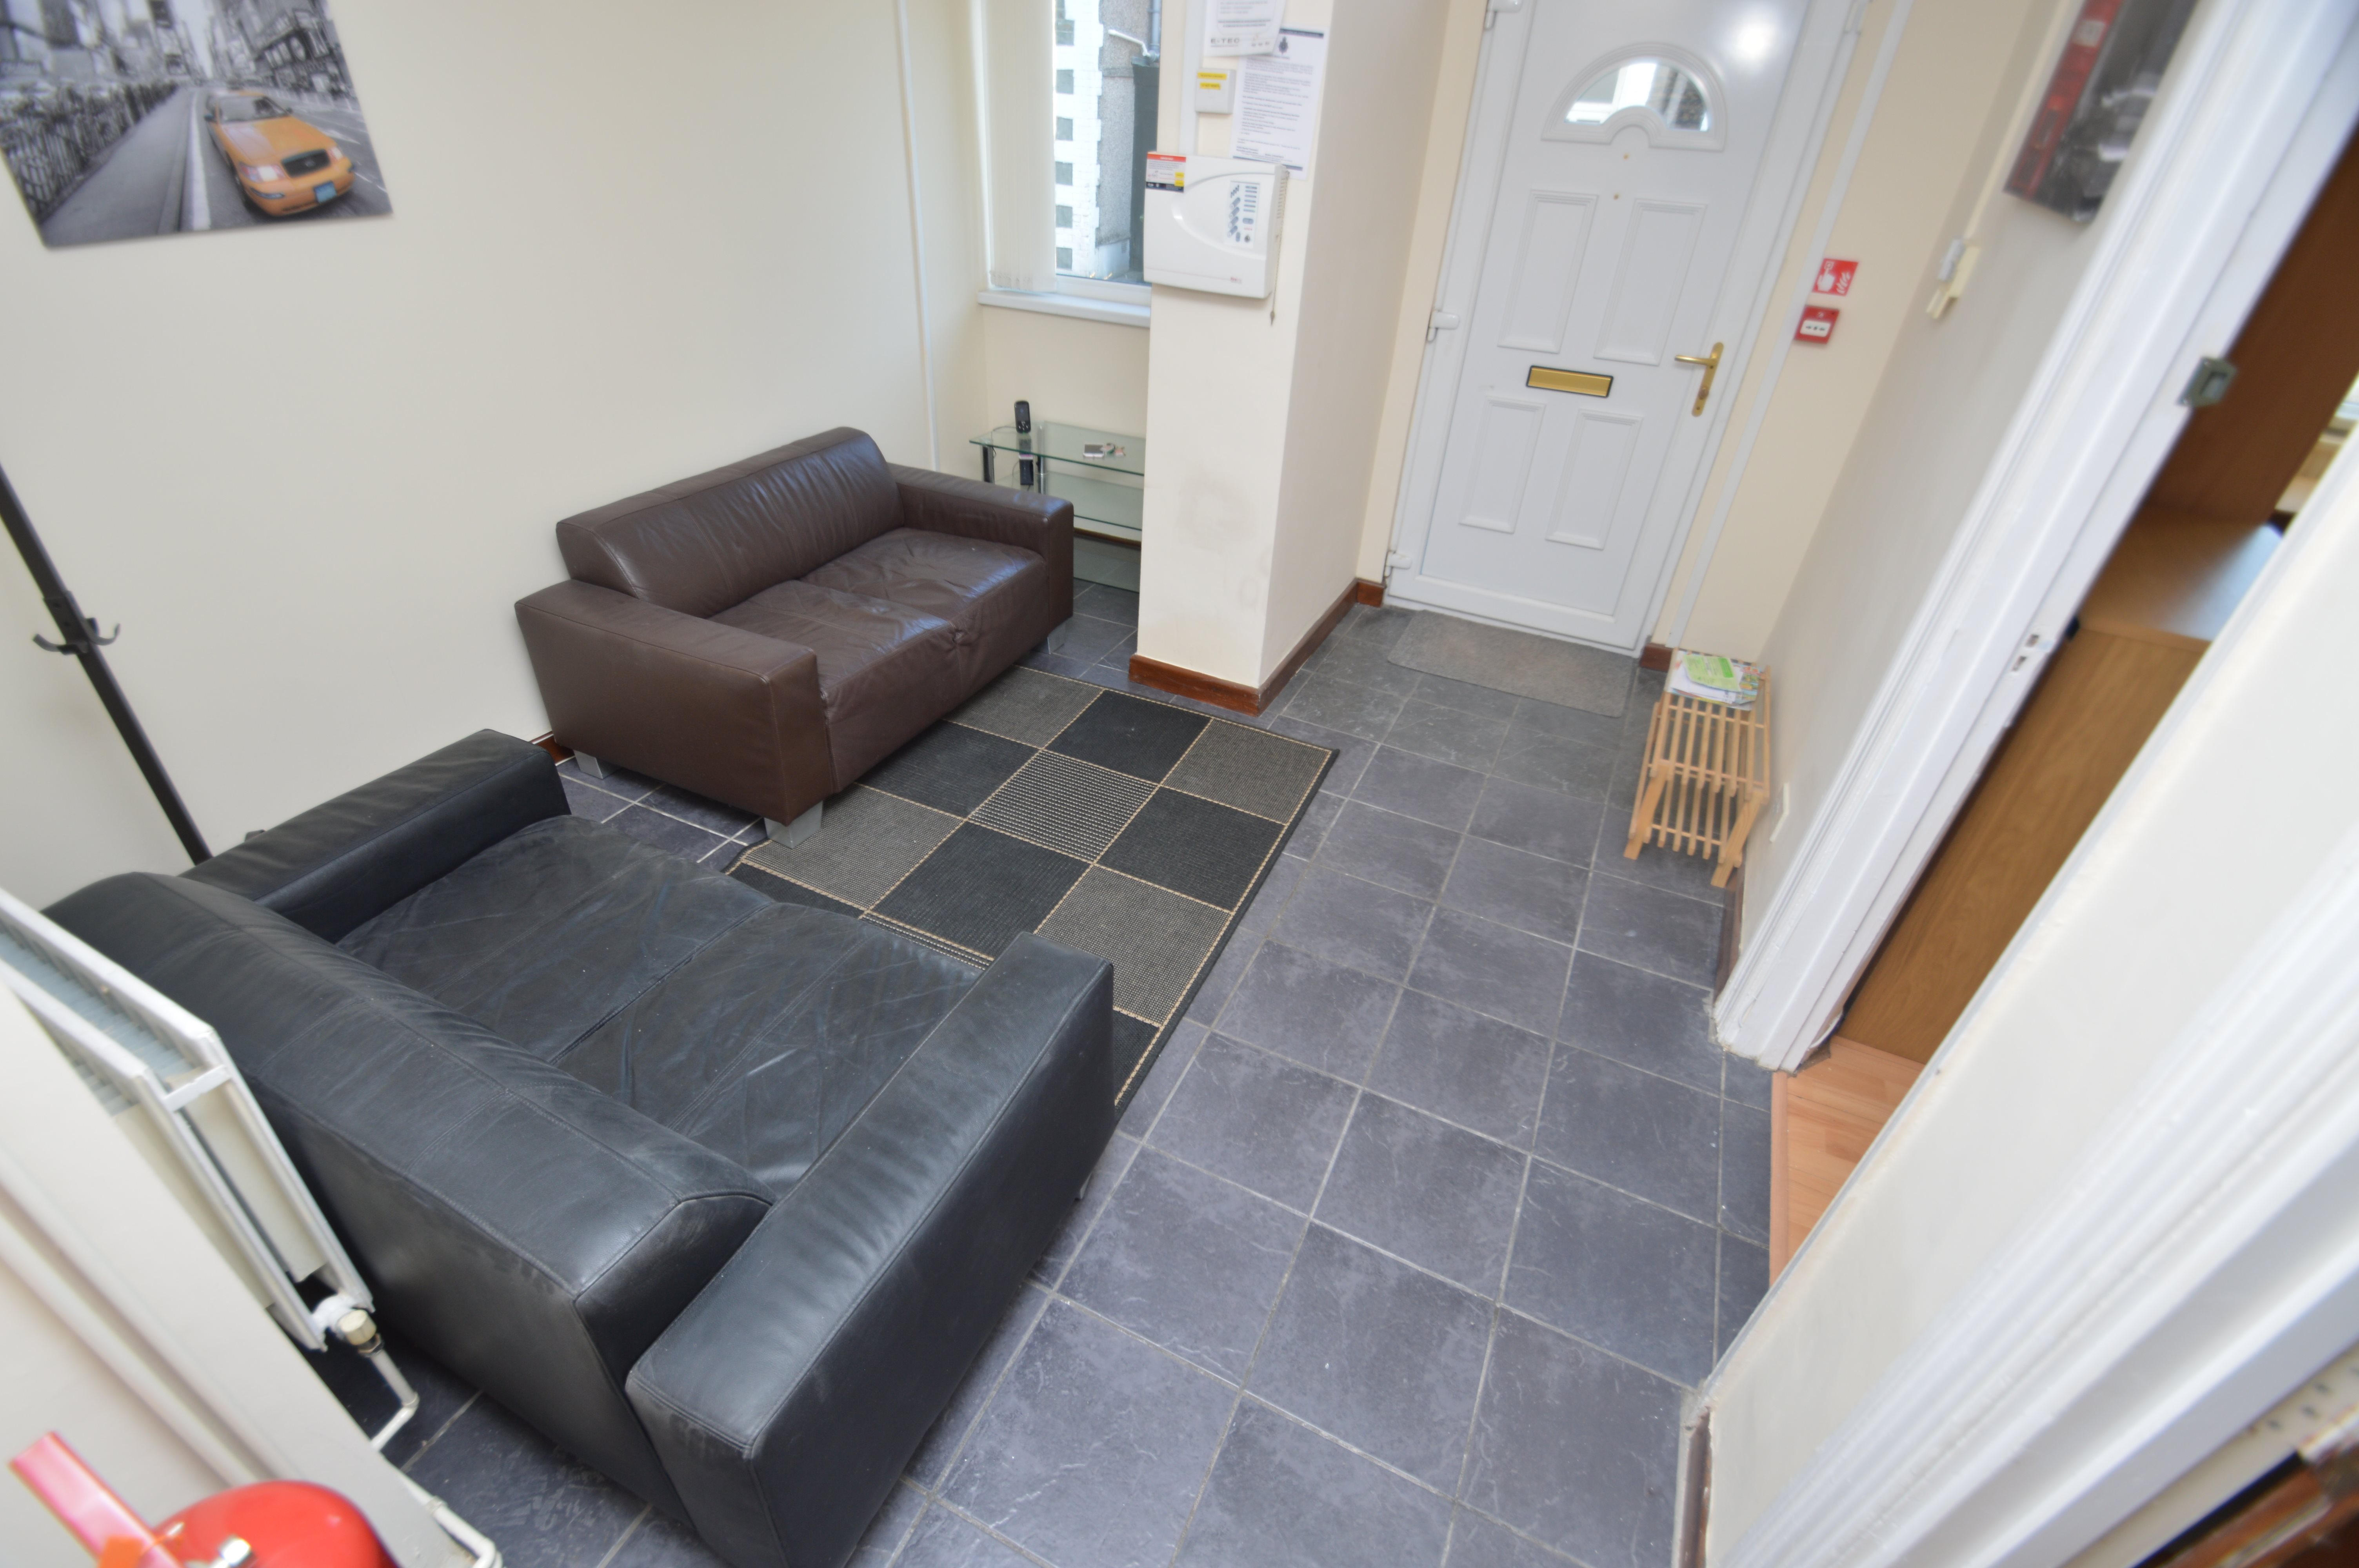 1 bed house / flat share to rent in Wood Road , Treforest  1